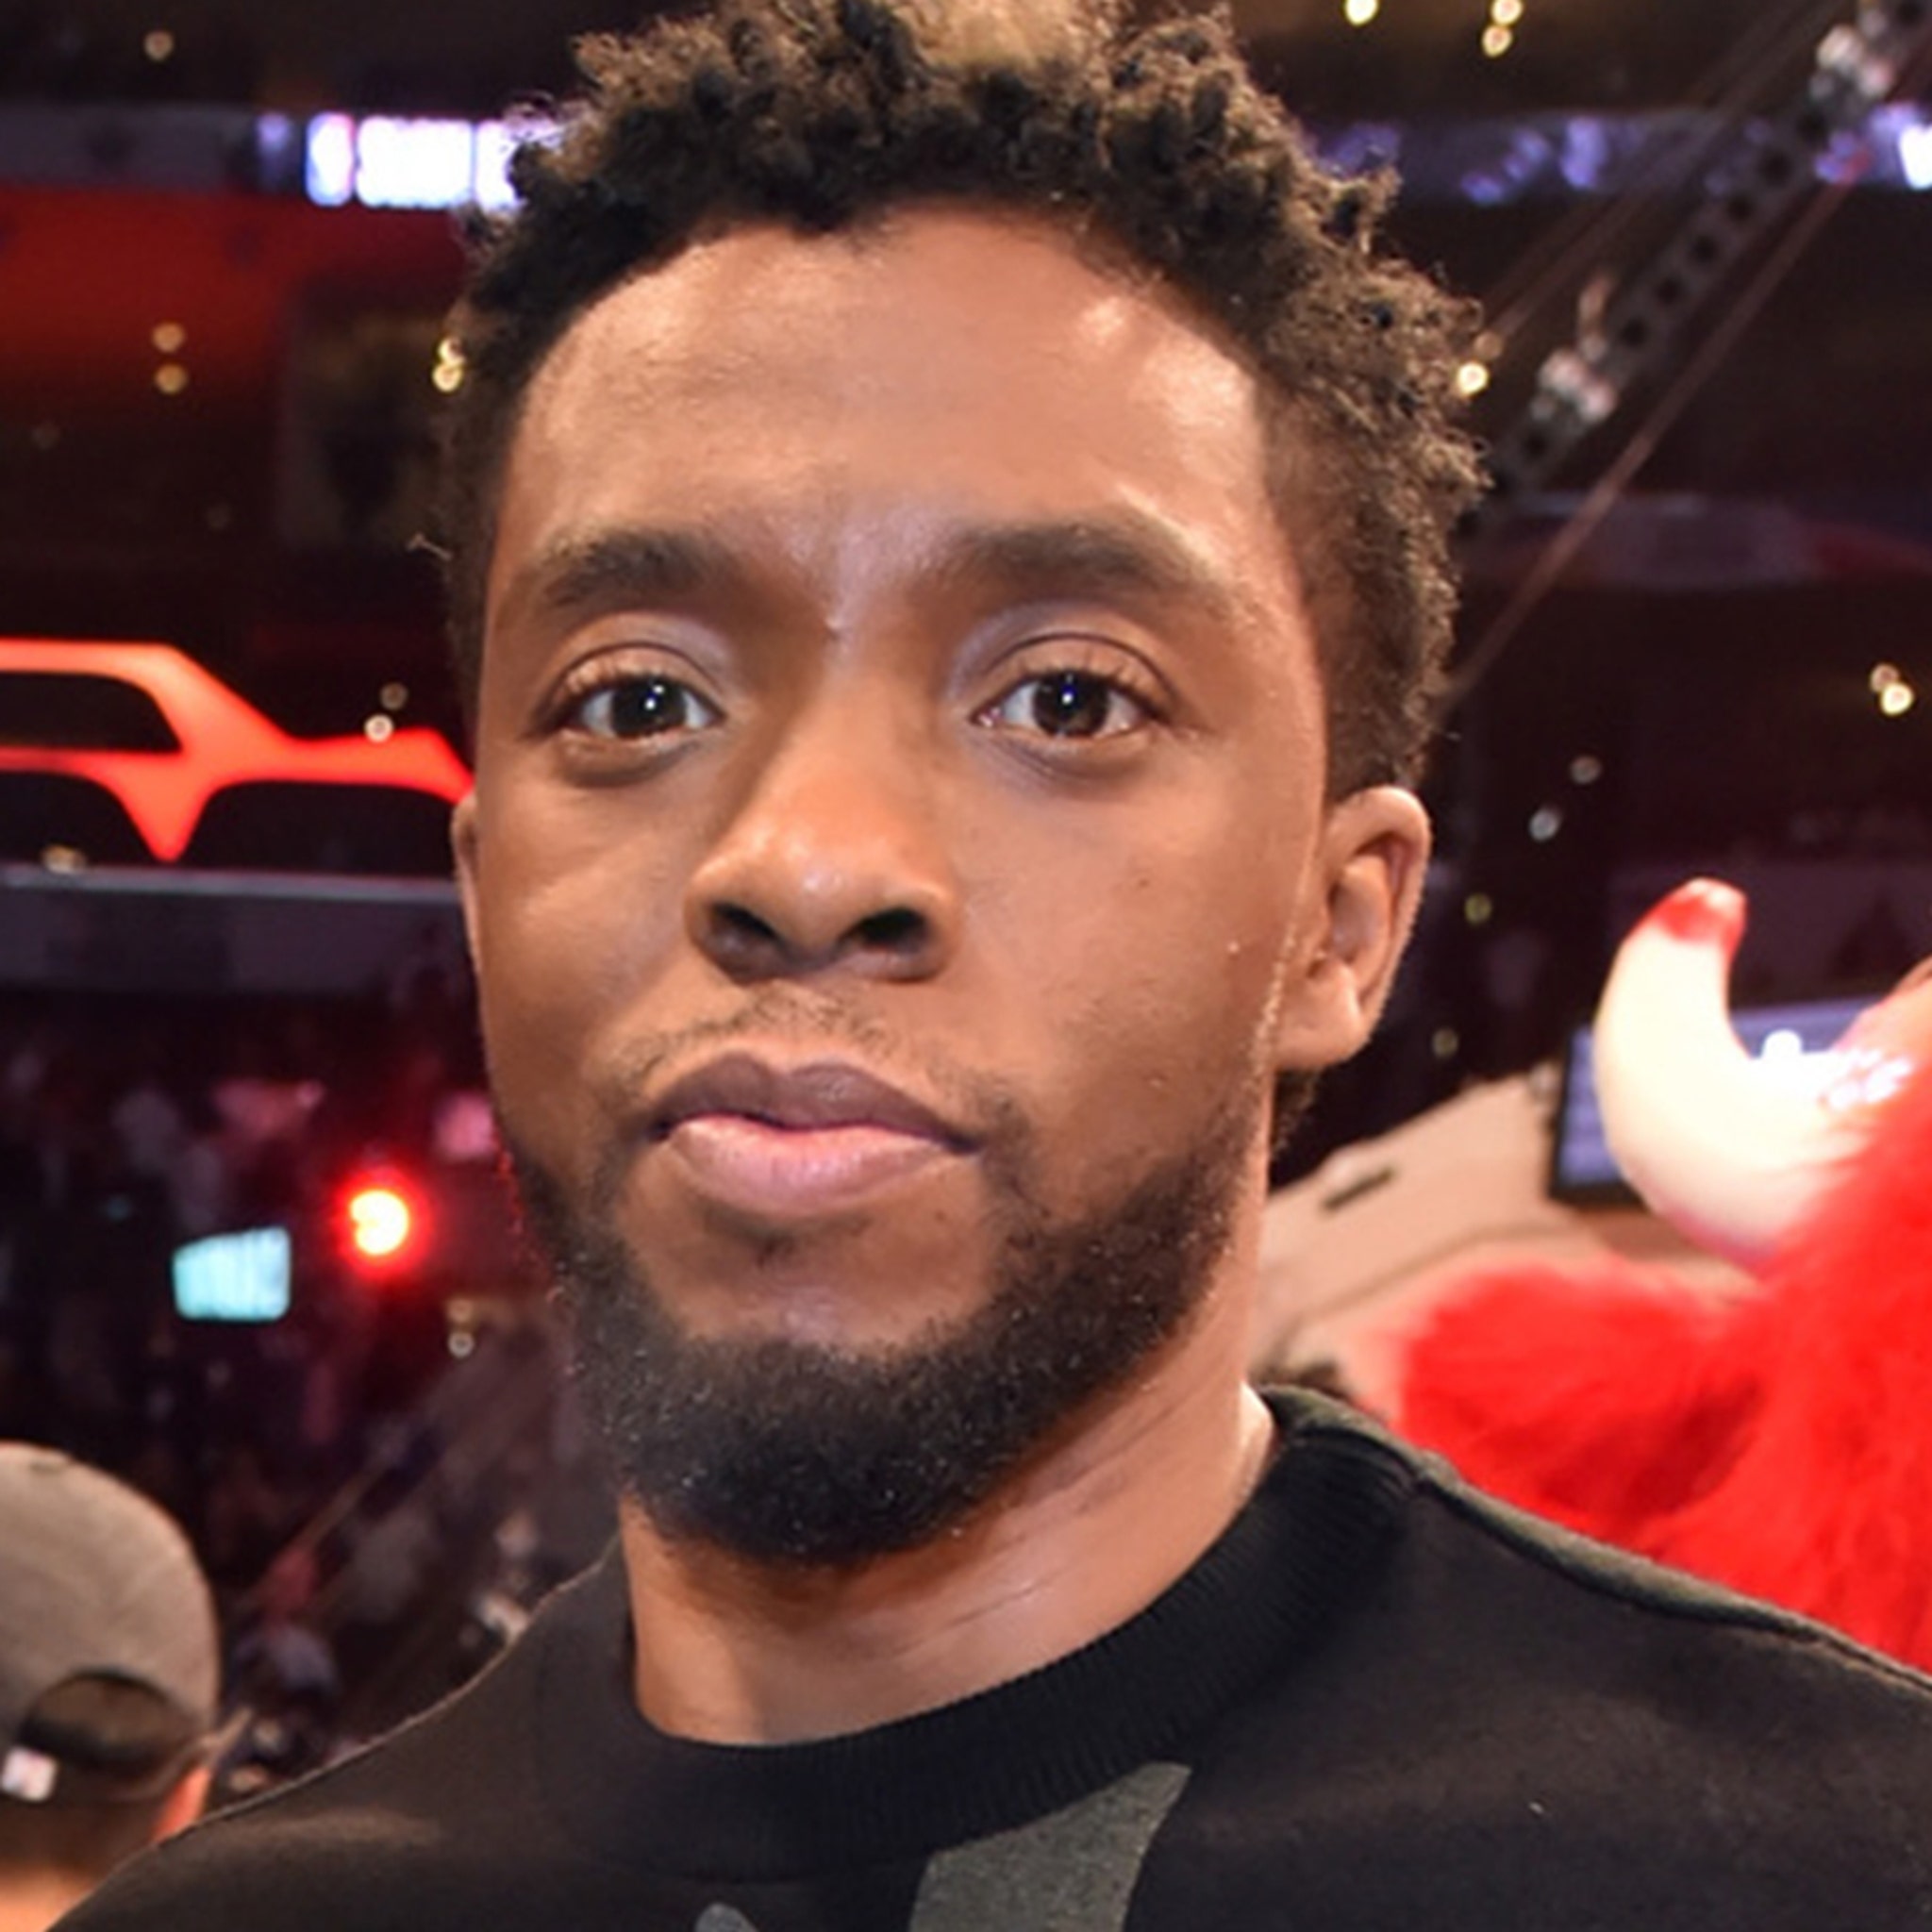 Chadwick Boseman Featured in 'Black Panther' Opening Credits, 44th Birthday